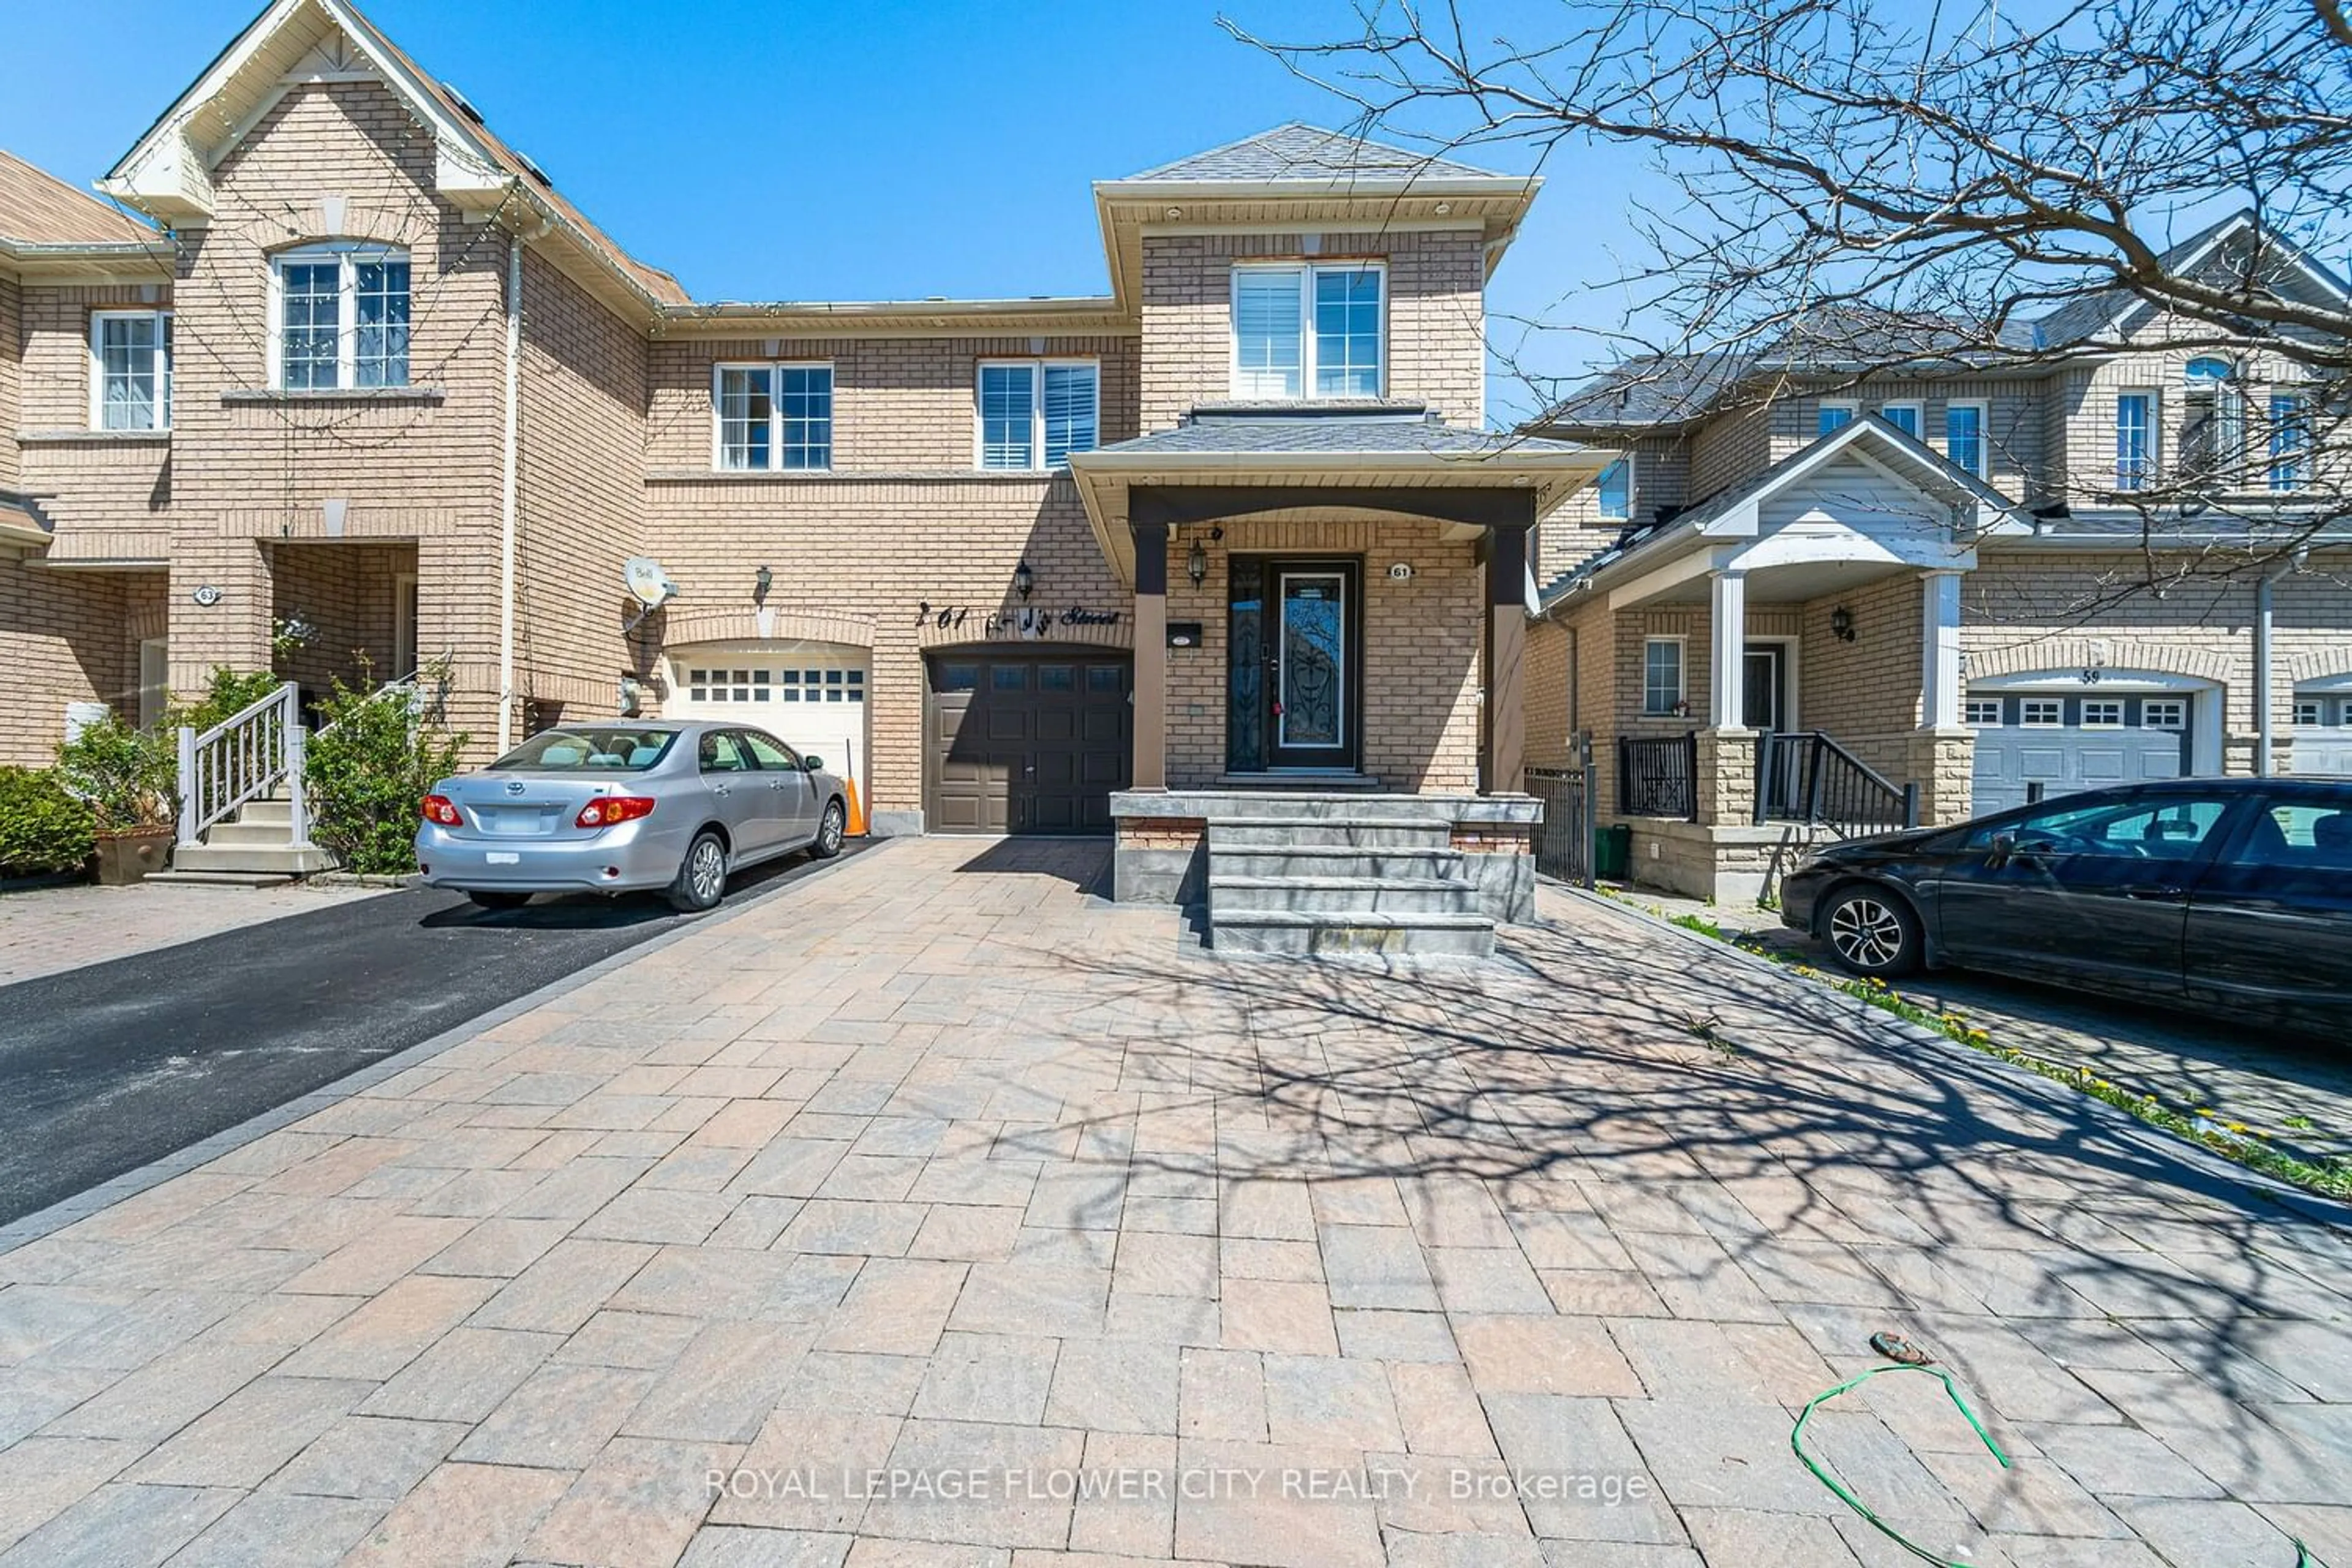 Home with brick exterior material for 61 Bashir St, Vaughan Ontario L6A 4B5